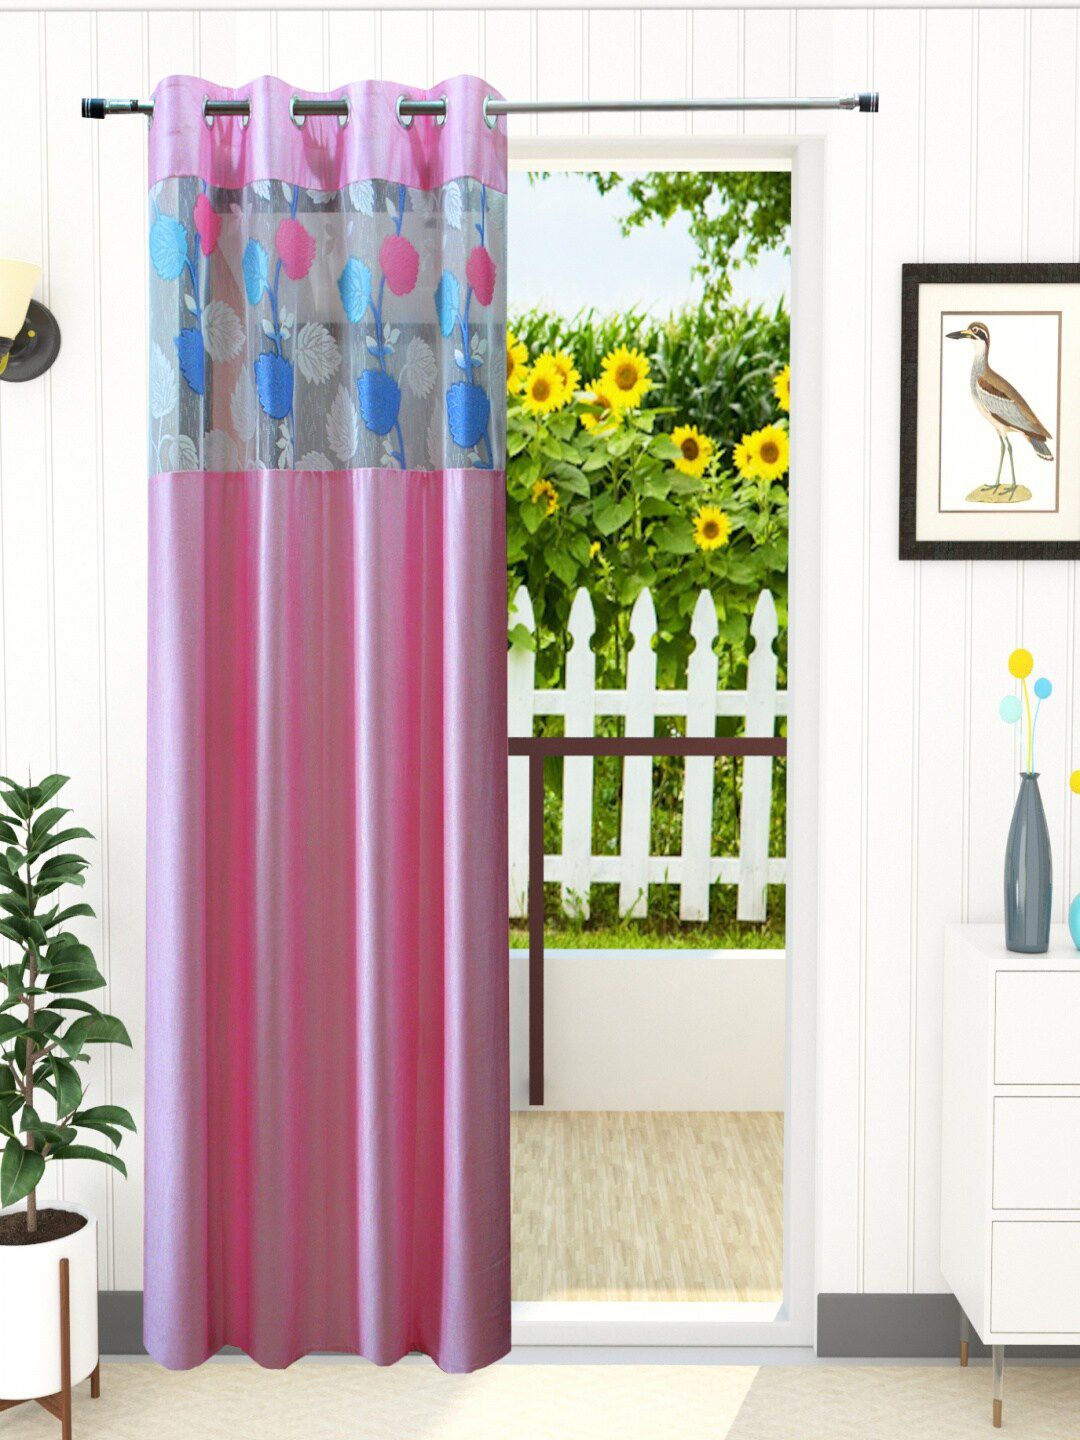 Homefab India Pink & Blue Set of 2 Sheer Window Curtain Price in India